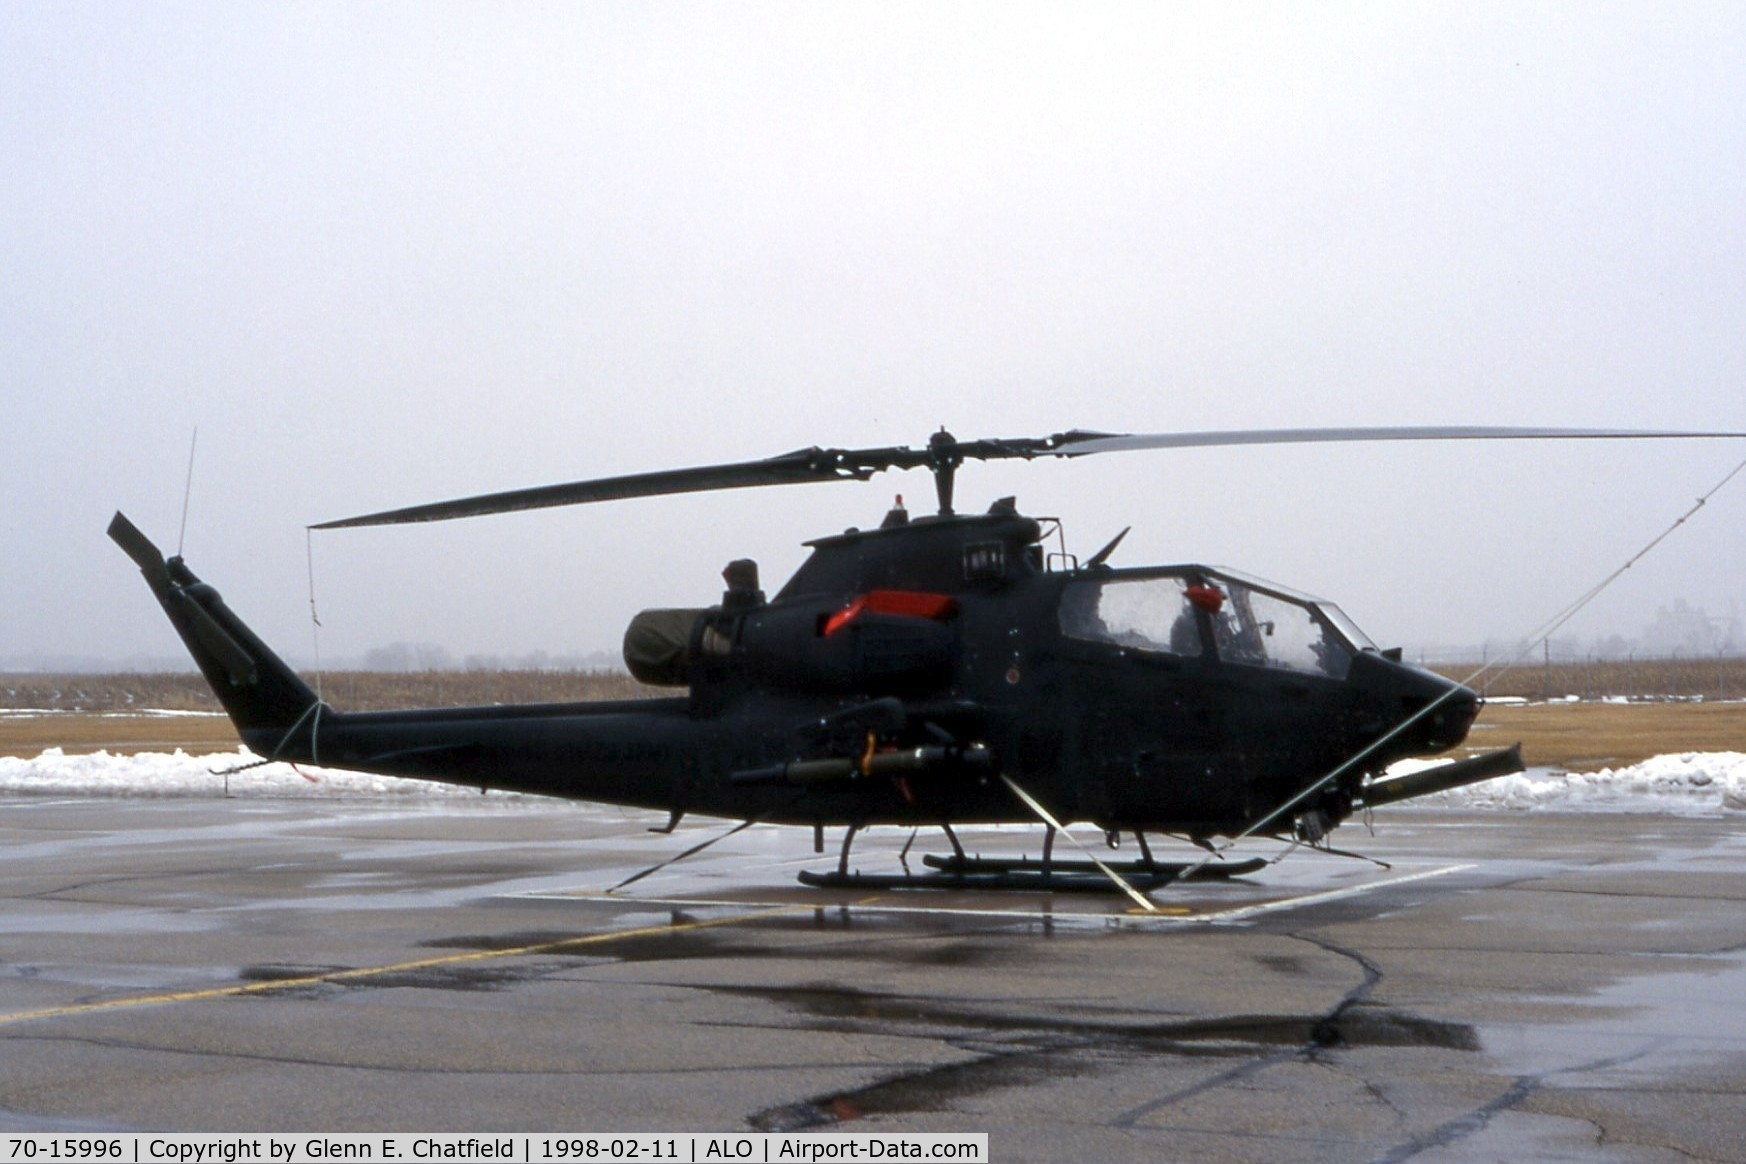 70-15996, 1970 Bell AH-1F Cobra C/N 20940, AH-1S of Iowa National Guard.  Taken during light, freezing drizzle.  The unit now flies OH-58s